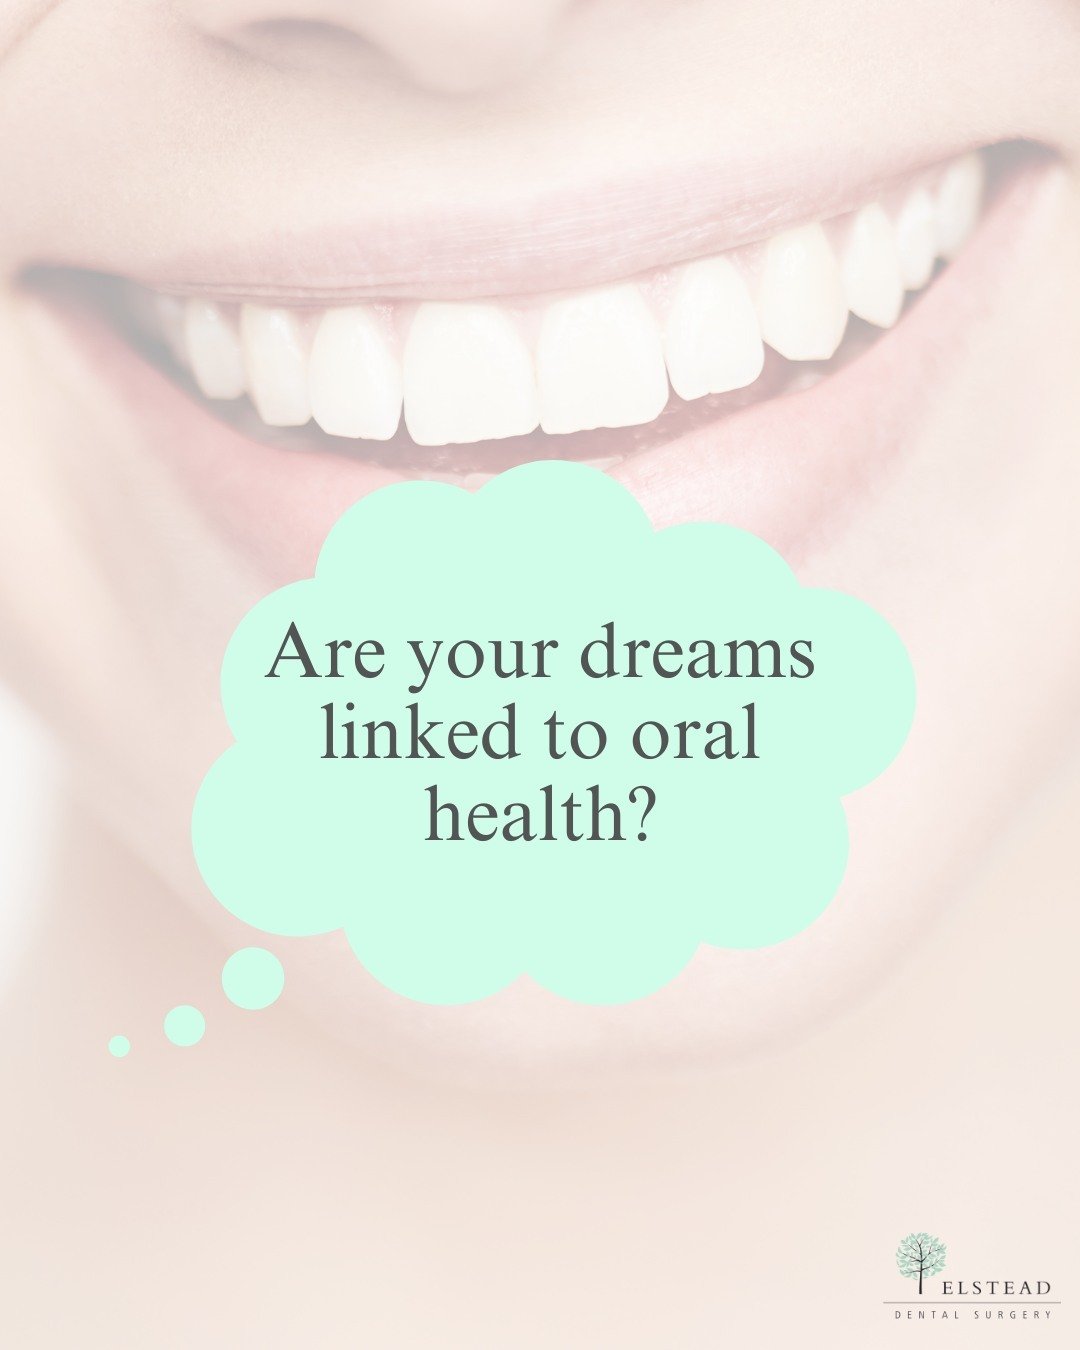 💭 Do your teeth fall out in your dreams? 😅

While these dreams can be unsettling, they're often linked to feelings of anxiety or changes in your life, not your oral heath! 
But hey, just to play it safe, ensure your smile stays in top-notch shape w